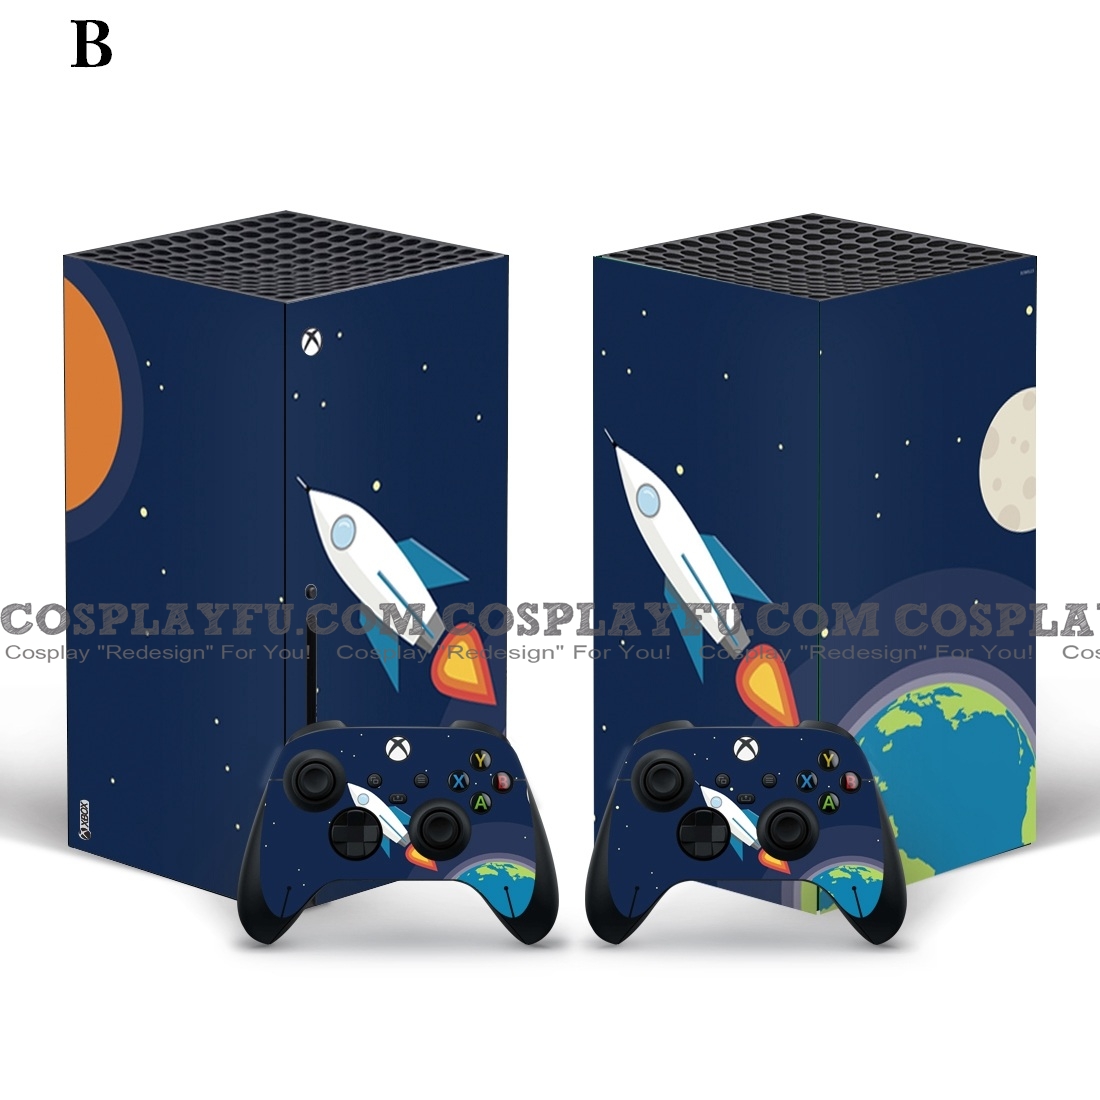 Space Skin Decal Для Xbox Series X Console And Controller, Full Wrap Vinyl Косплей